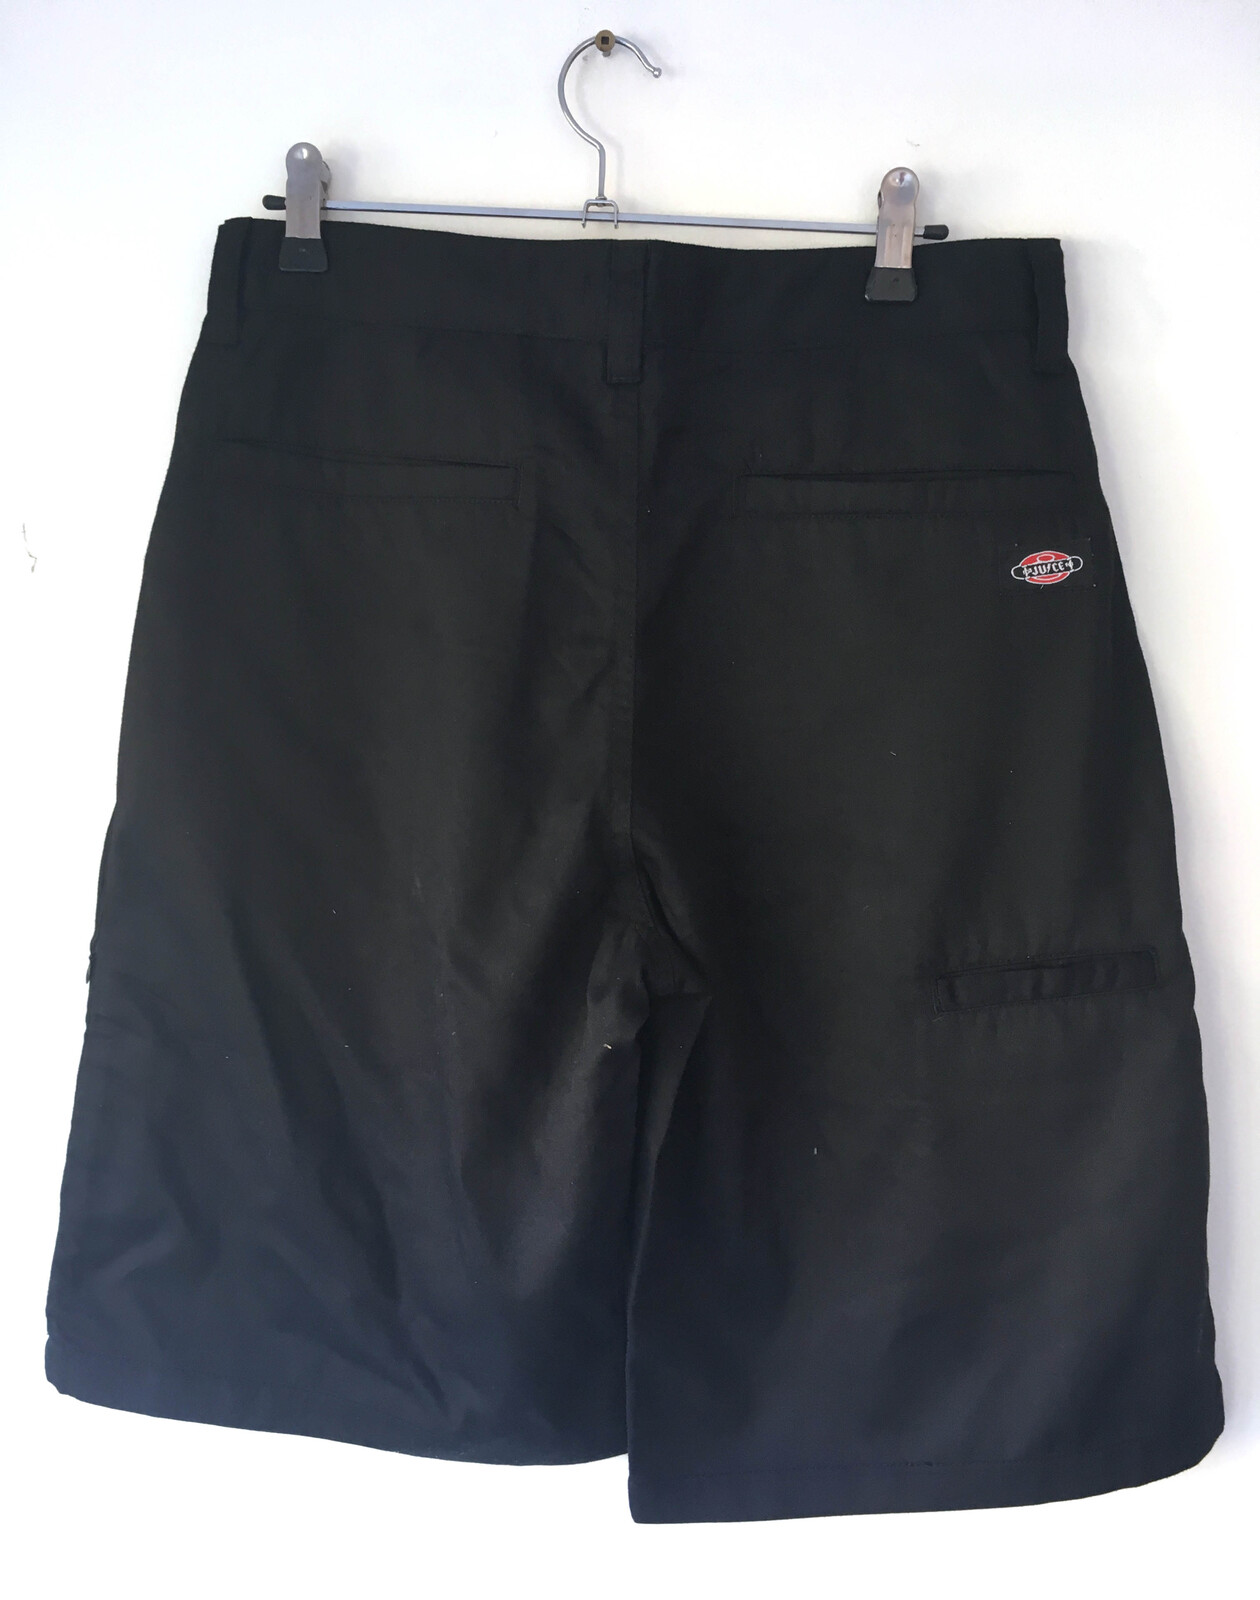 JUICE CLOTHING WORKER SHORTS AUST SELLER NEW SHORTS DICKIES